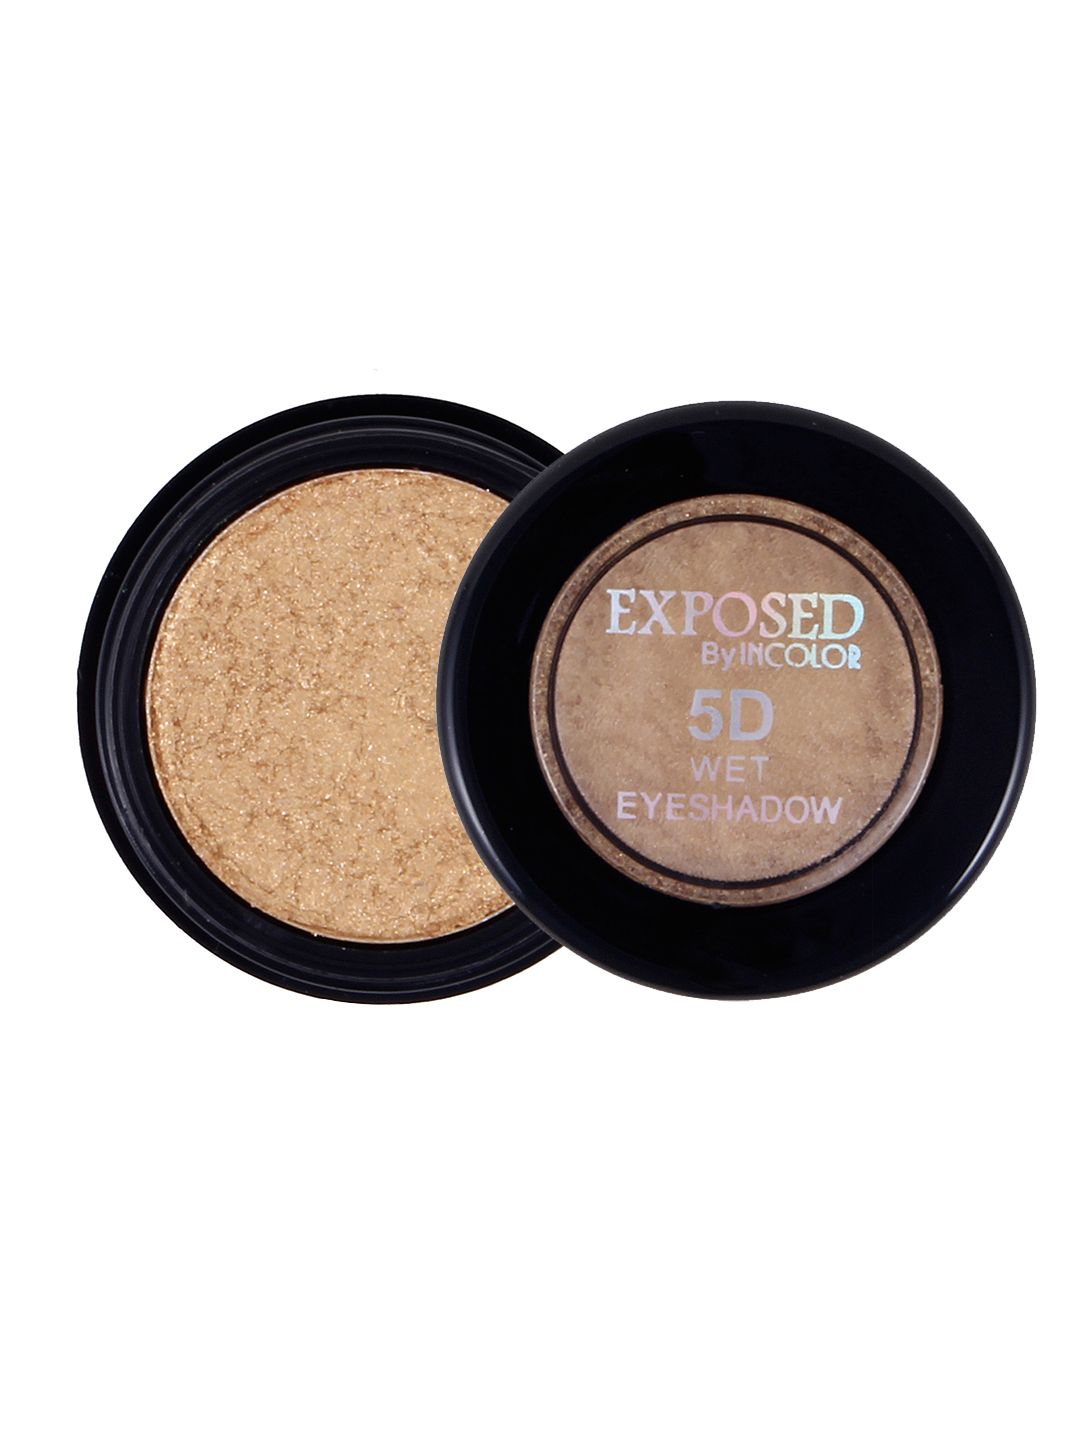 INCOLOR 5 D Wet Eyeshadow 01 4.5 gm Price in India